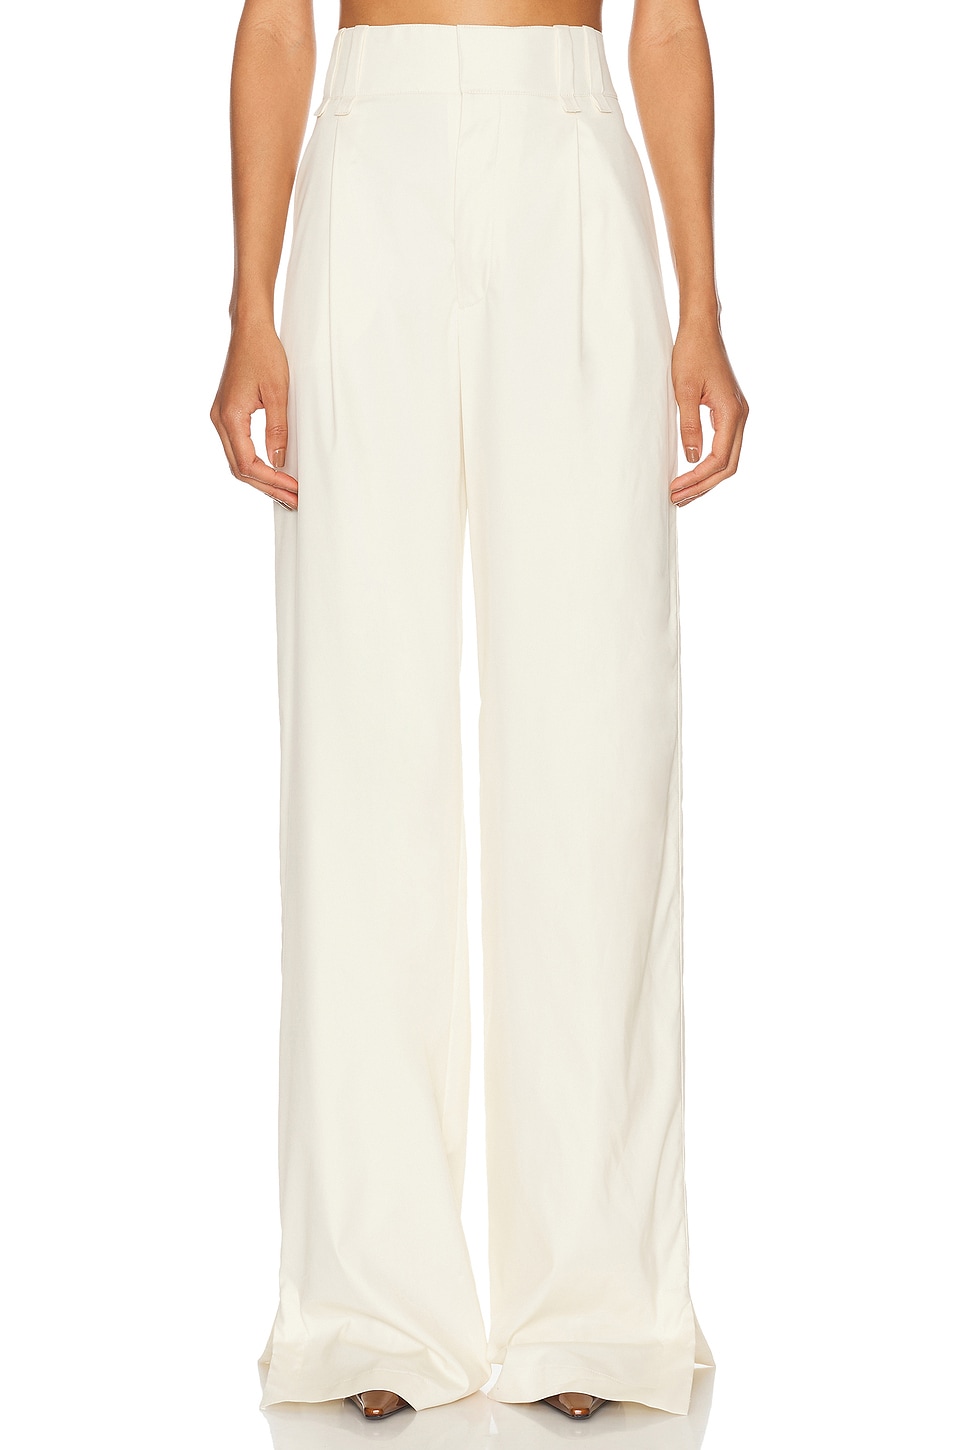 Bootcut Pant in White